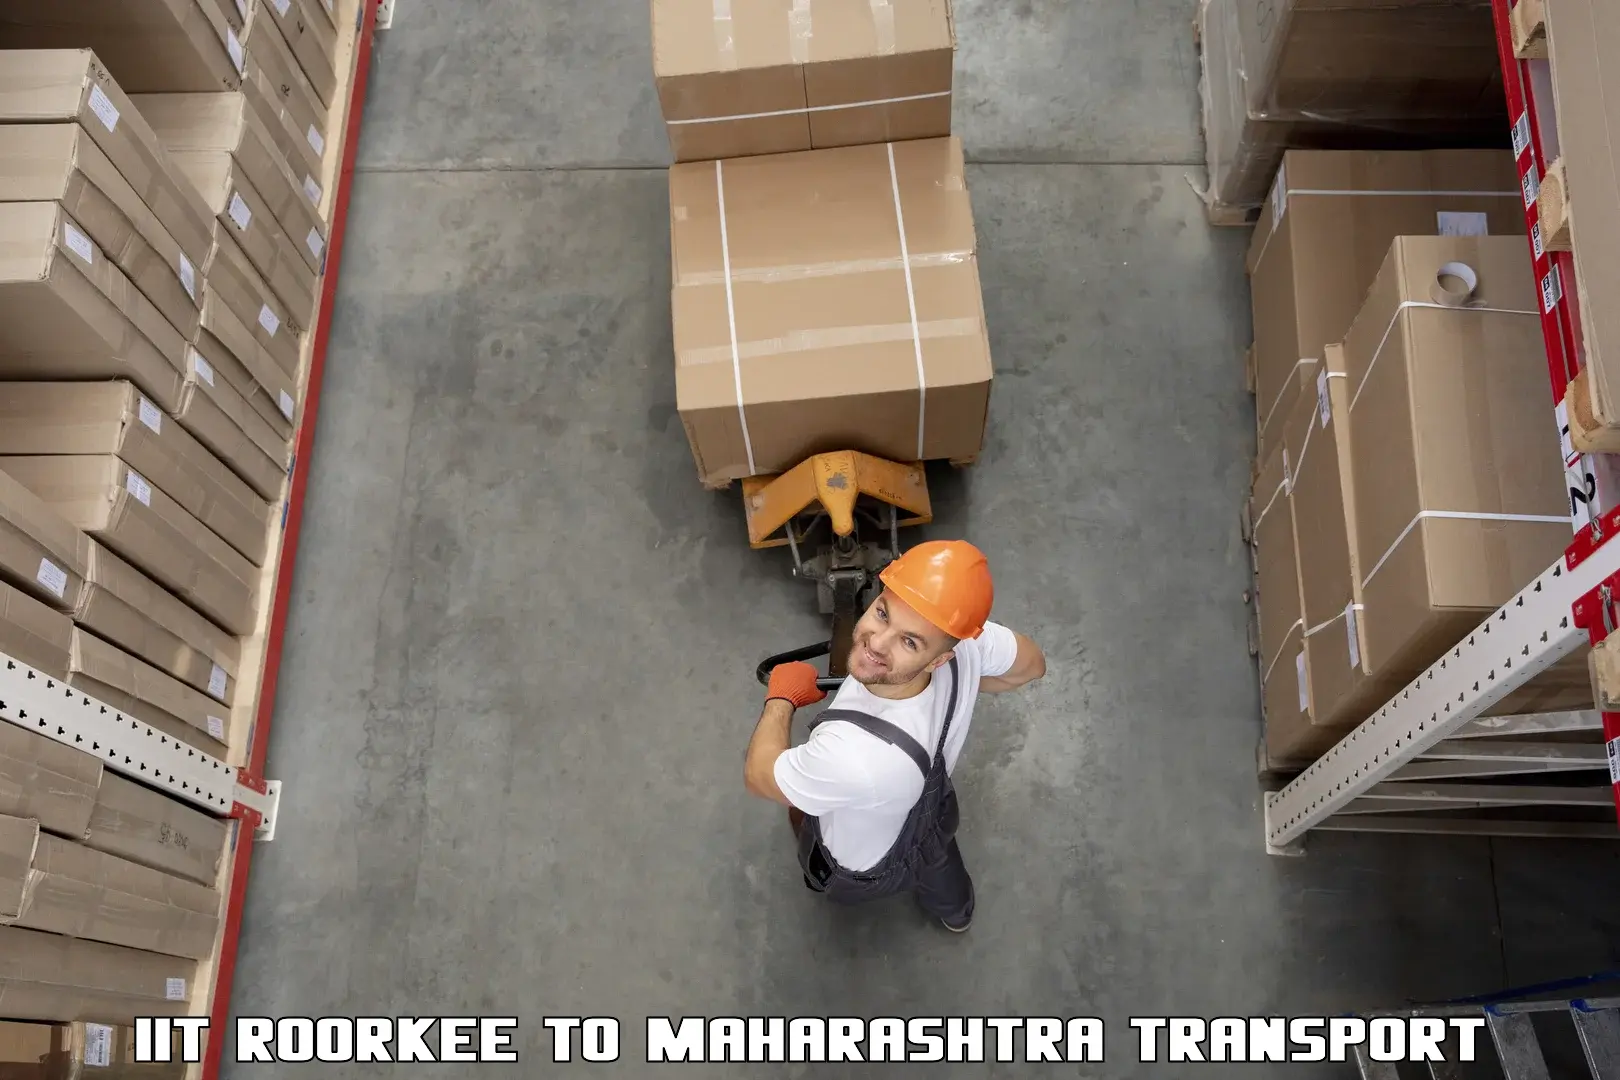 Express transport services IIT Roorkee to DY Patil Vidyapeeth Mumbai